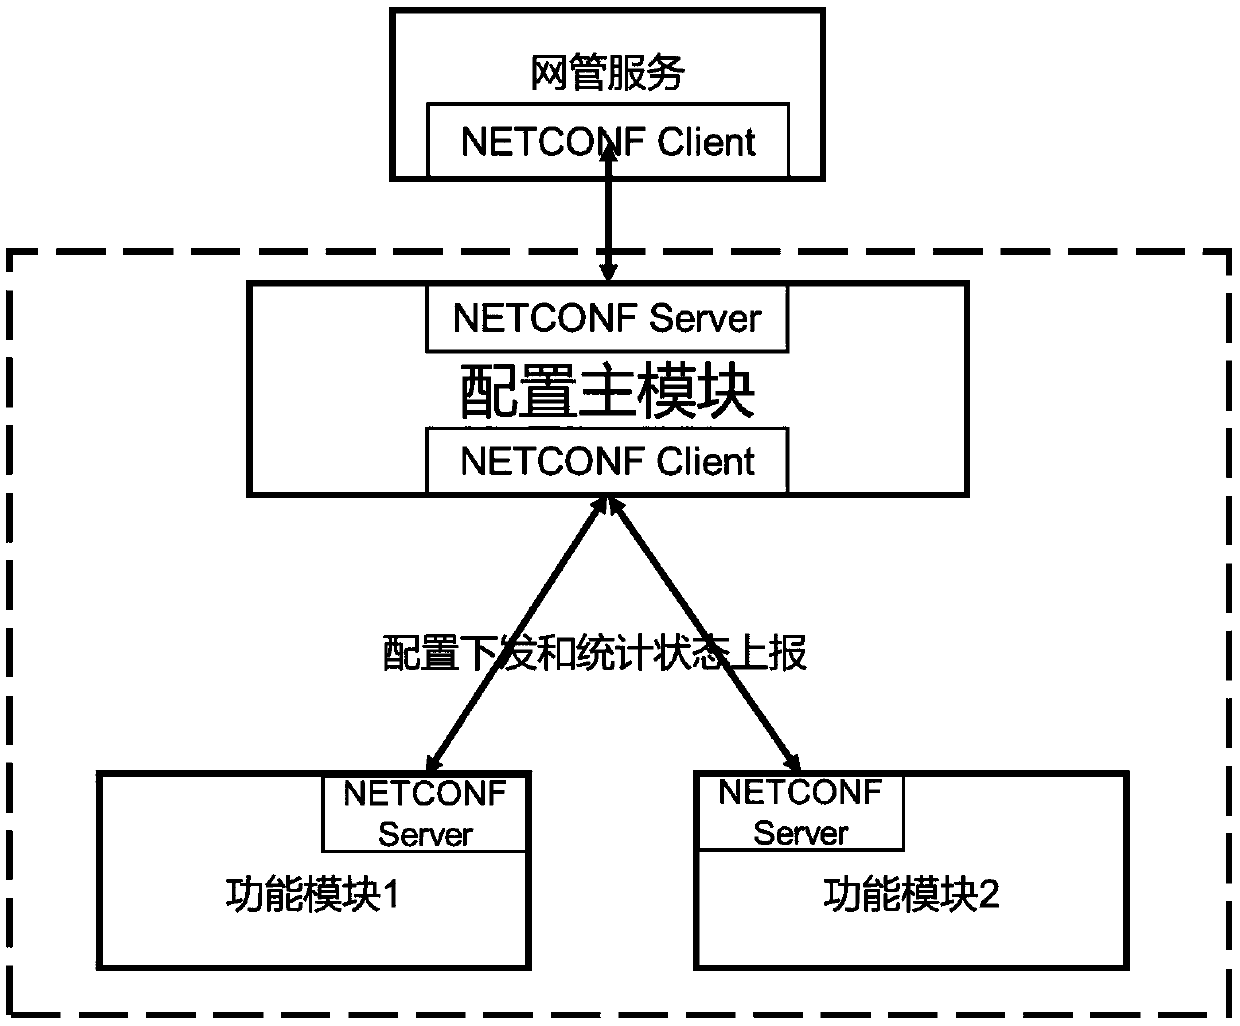 A method for network device configuration management based on netconf